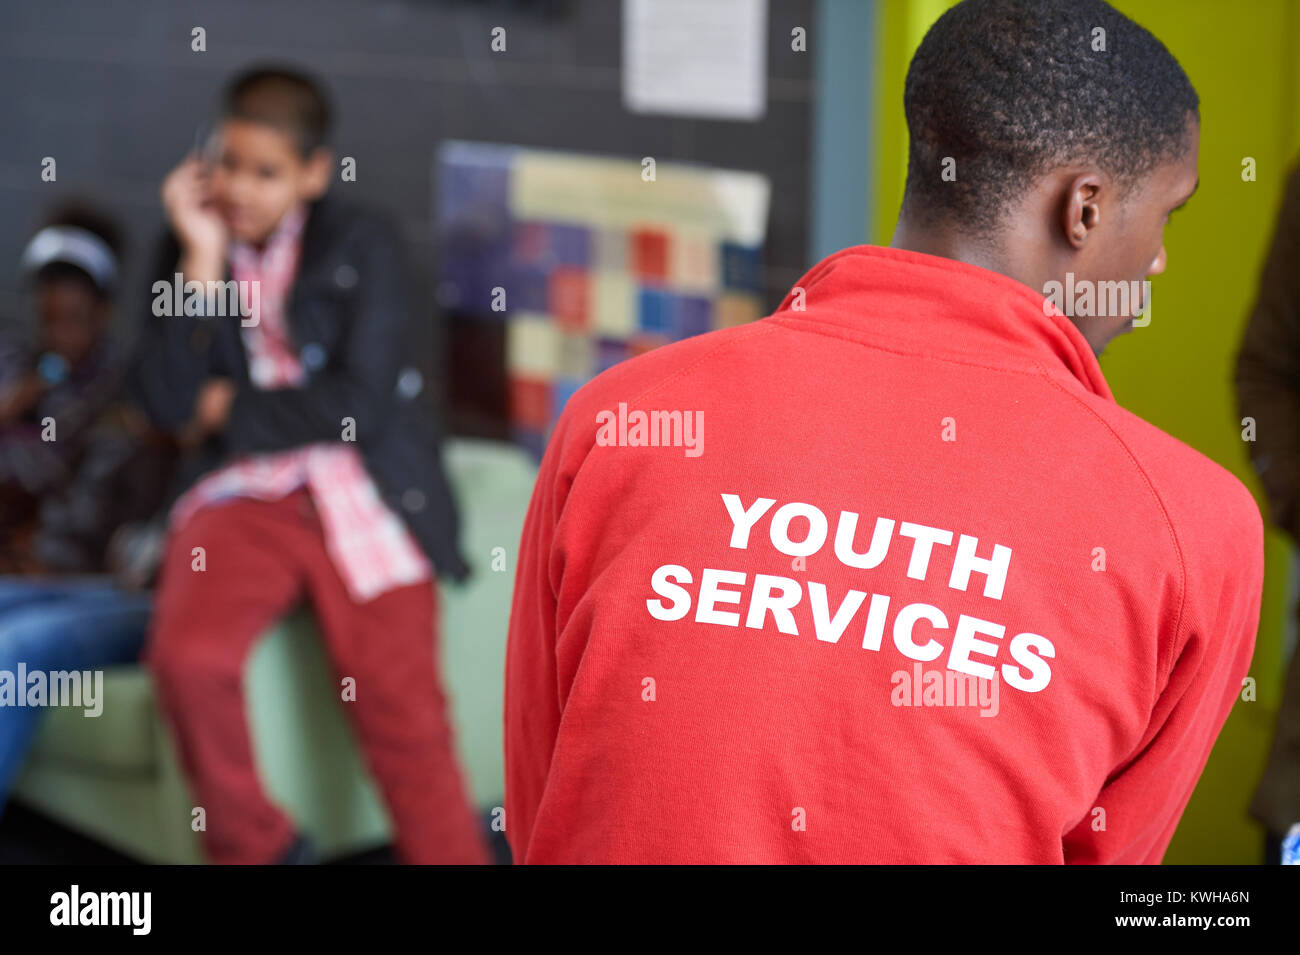 Youth Services Stockfoto